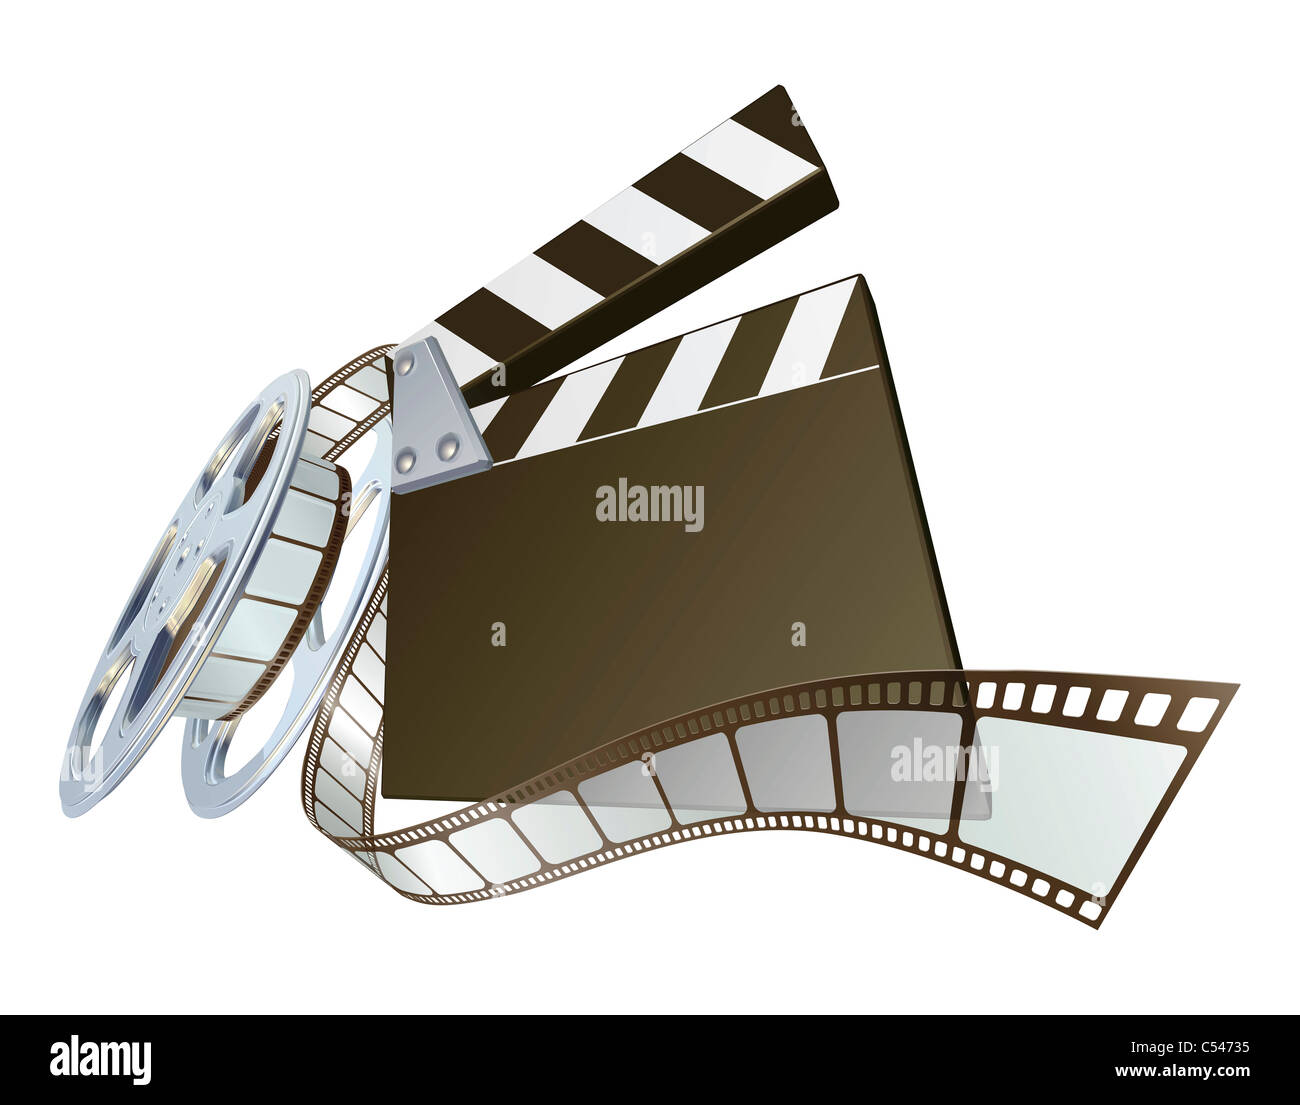 A clapperboard and film spooling out of film reel illustration. Dynamic perspective and copyspace on the board for your text. Stock Photo